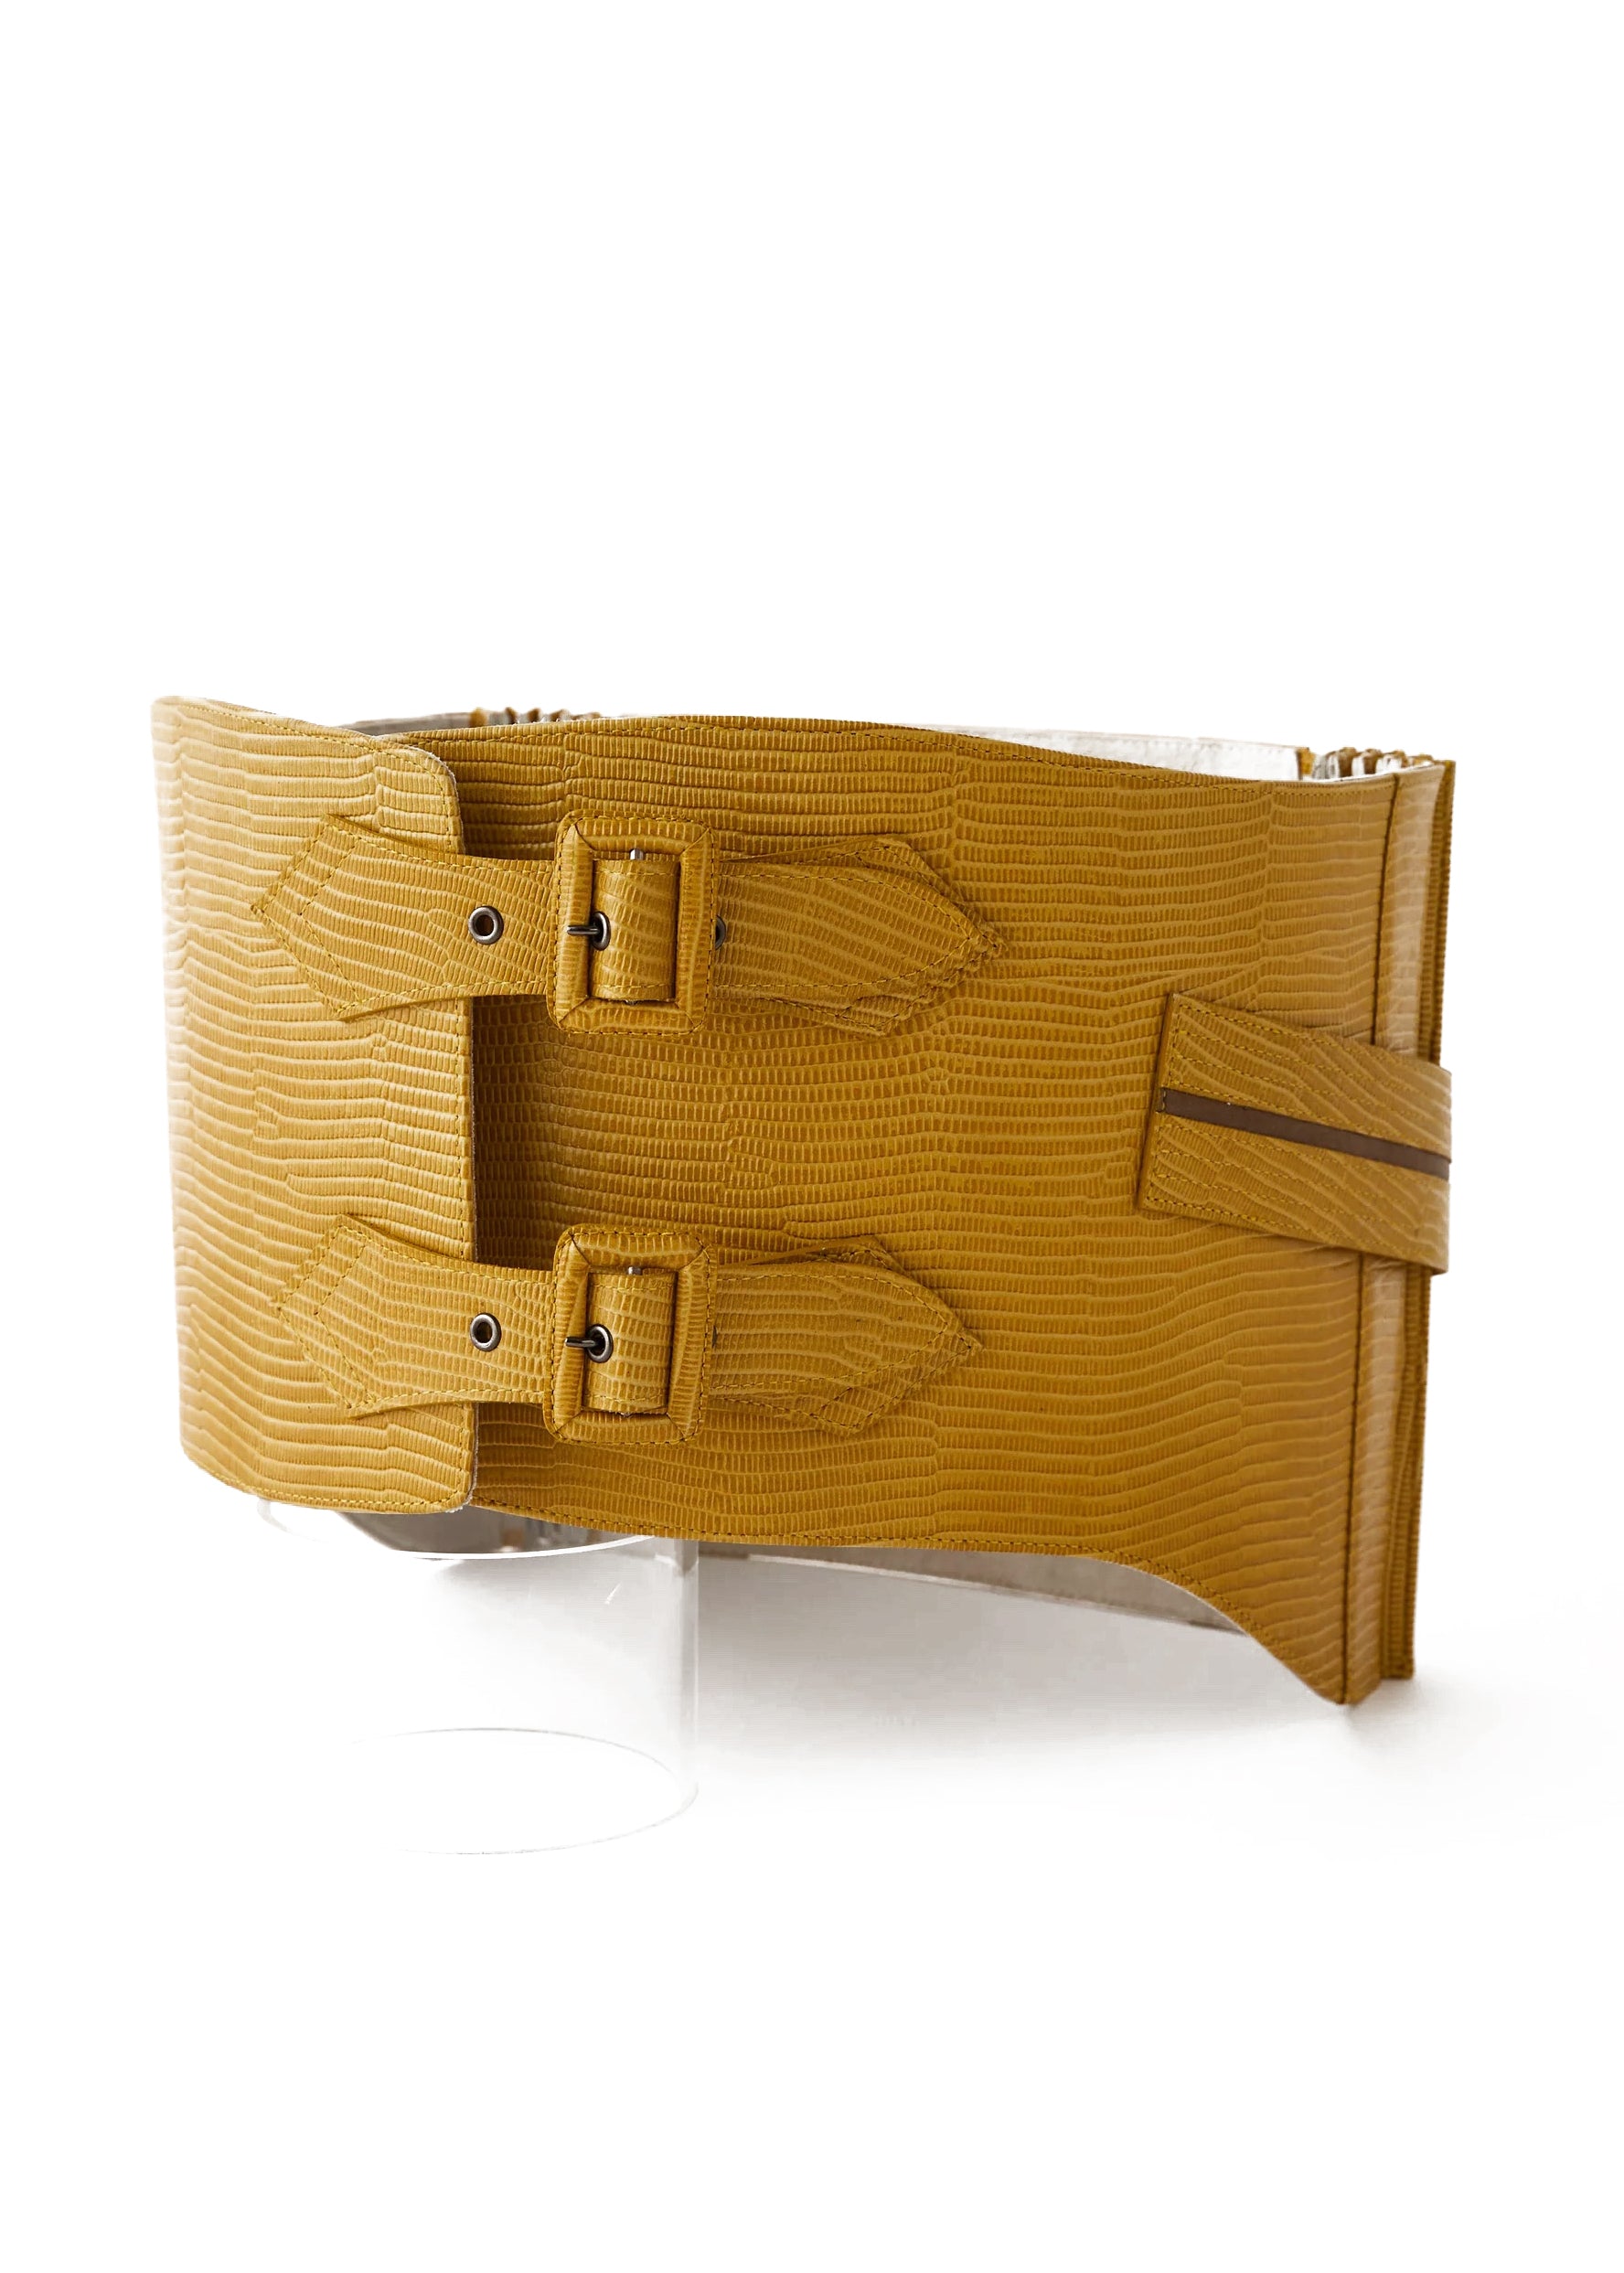 [Immediate delivery available] Leather obi belt "Lizard Mustard"